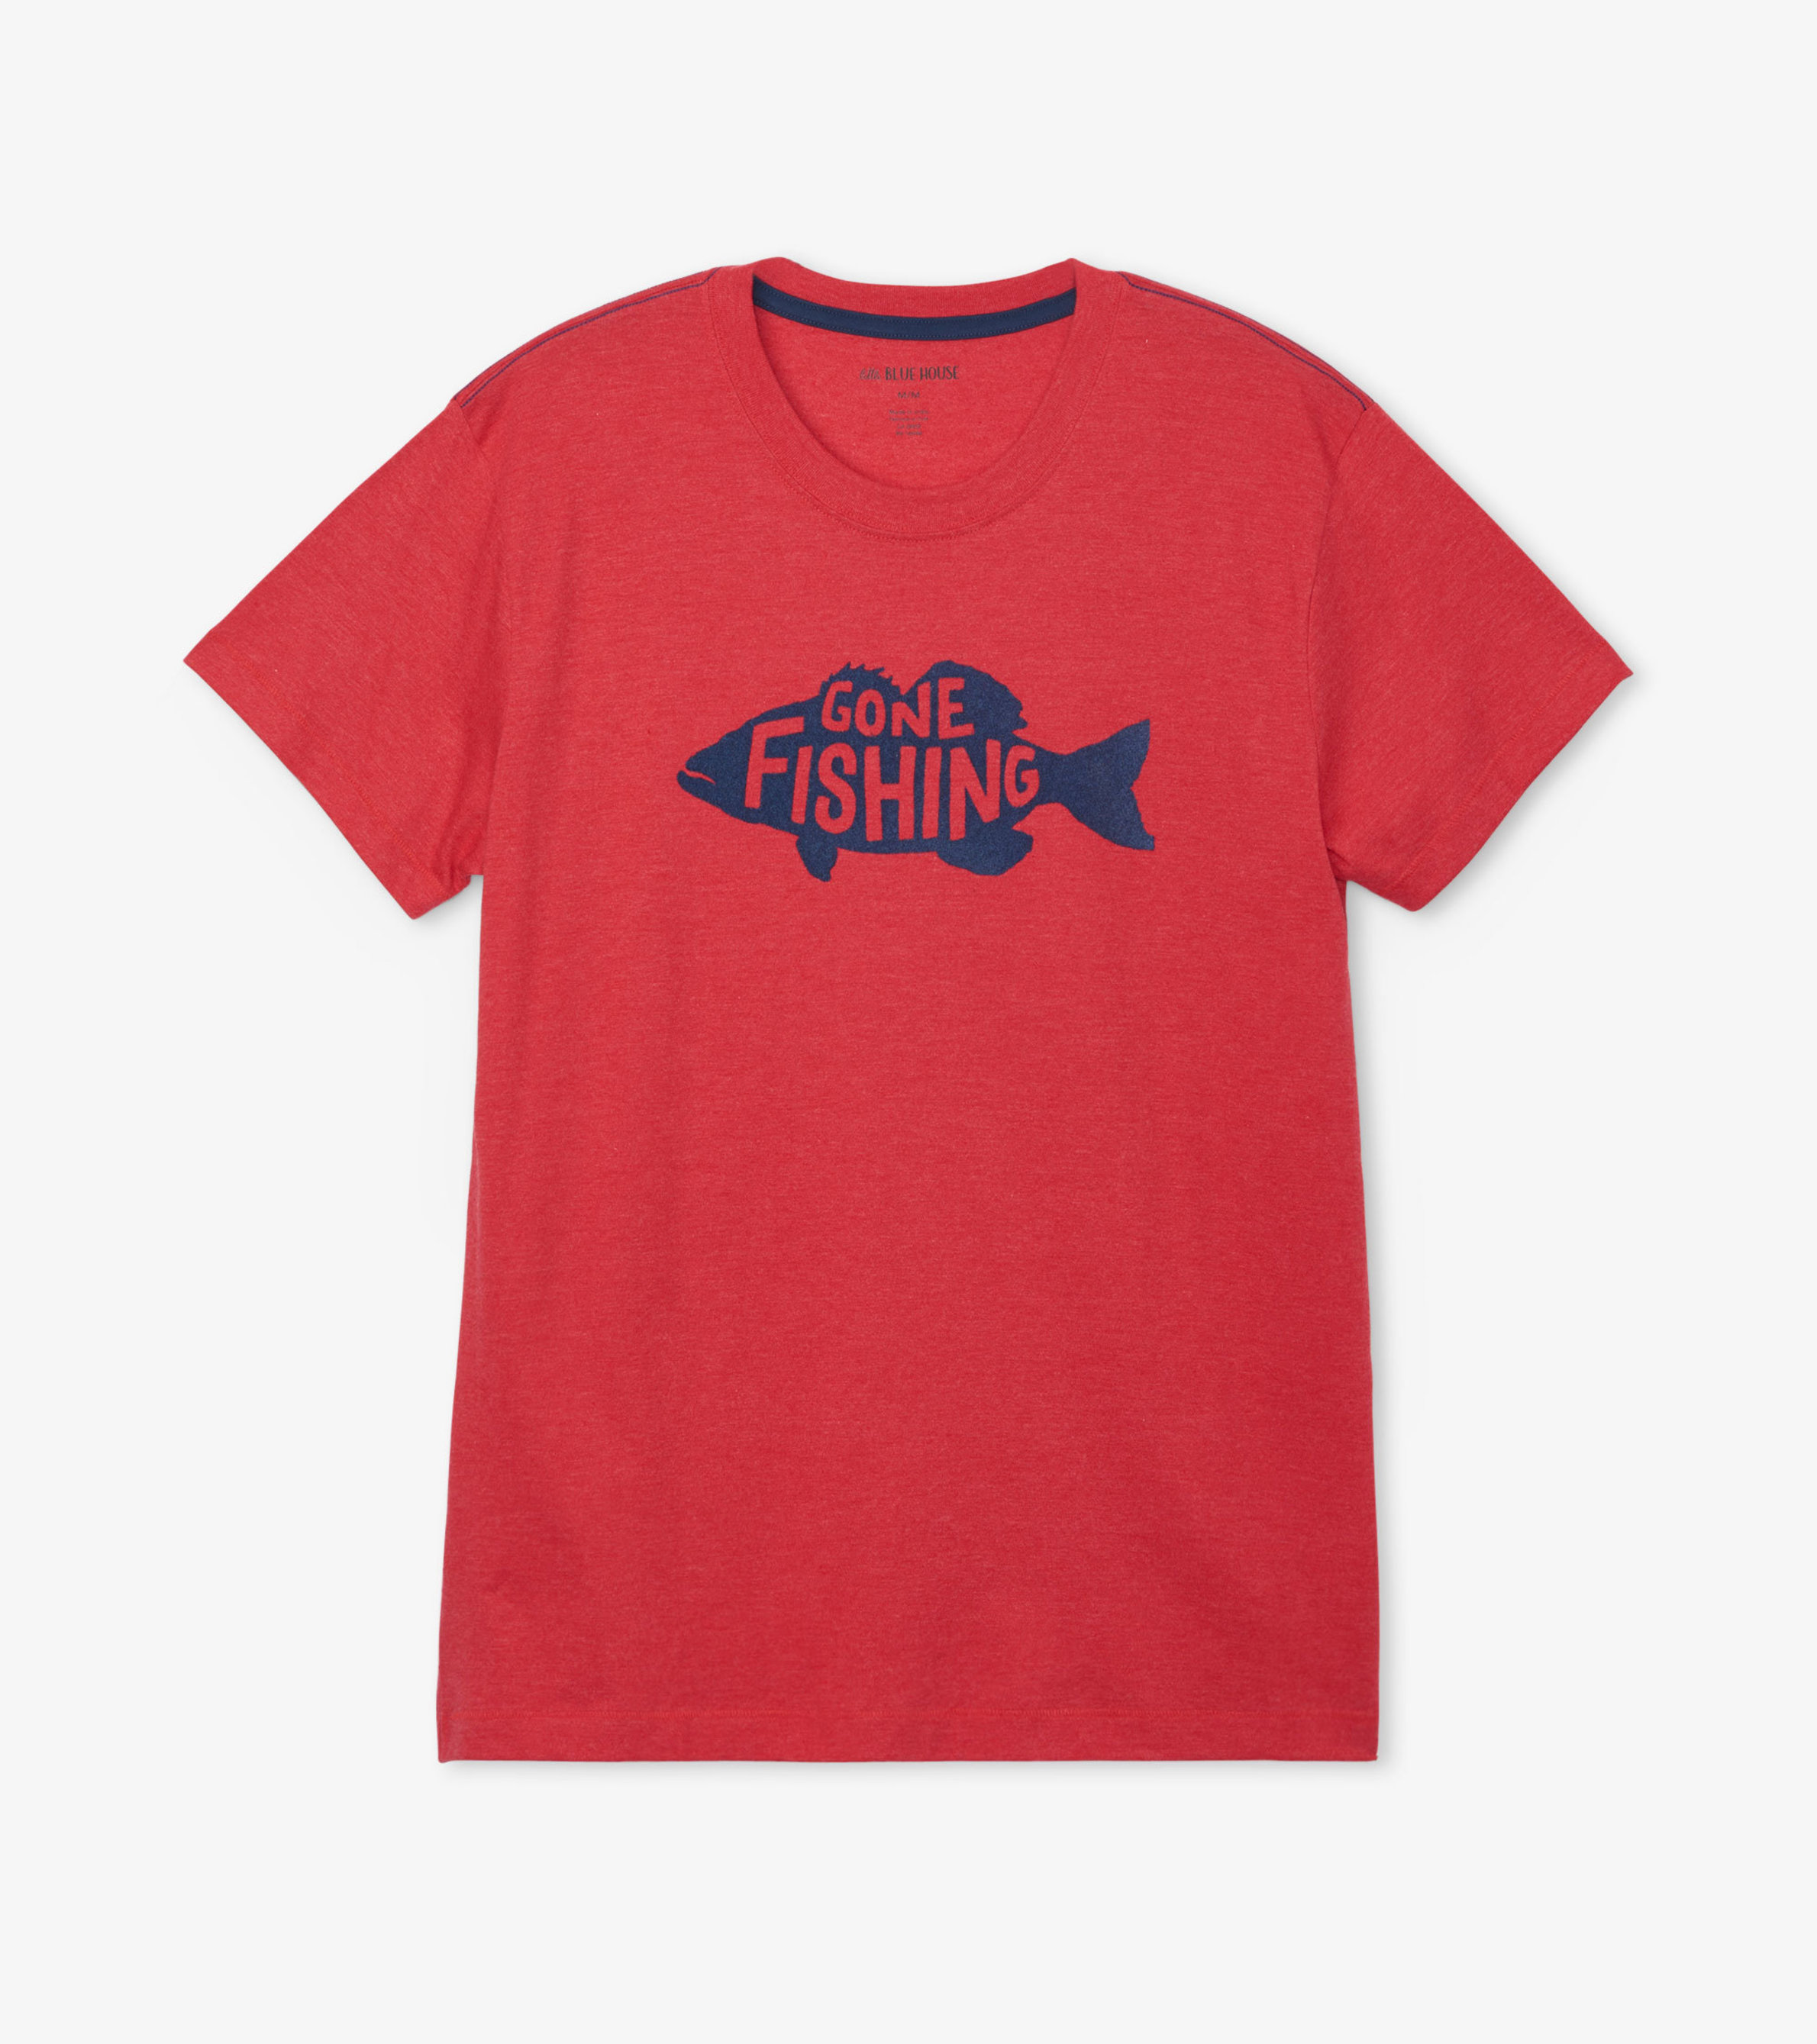 Gone Fishing Kids Clothing & Accessories - CafePress